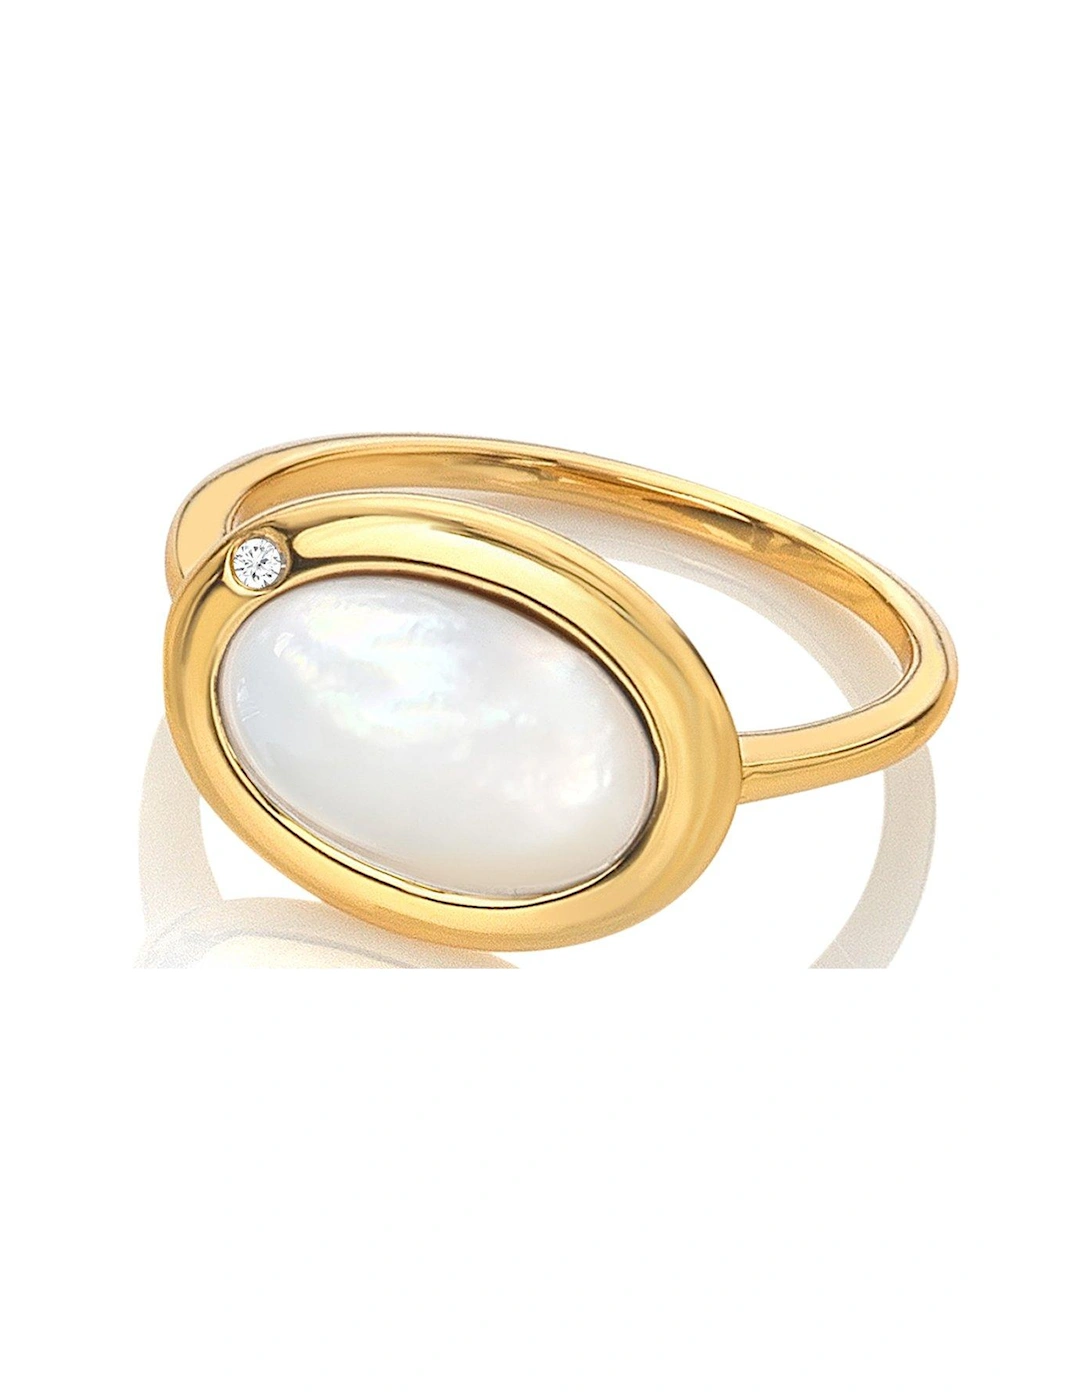 HDXGEM Horizontal Oval Ring - Mother of Pearl